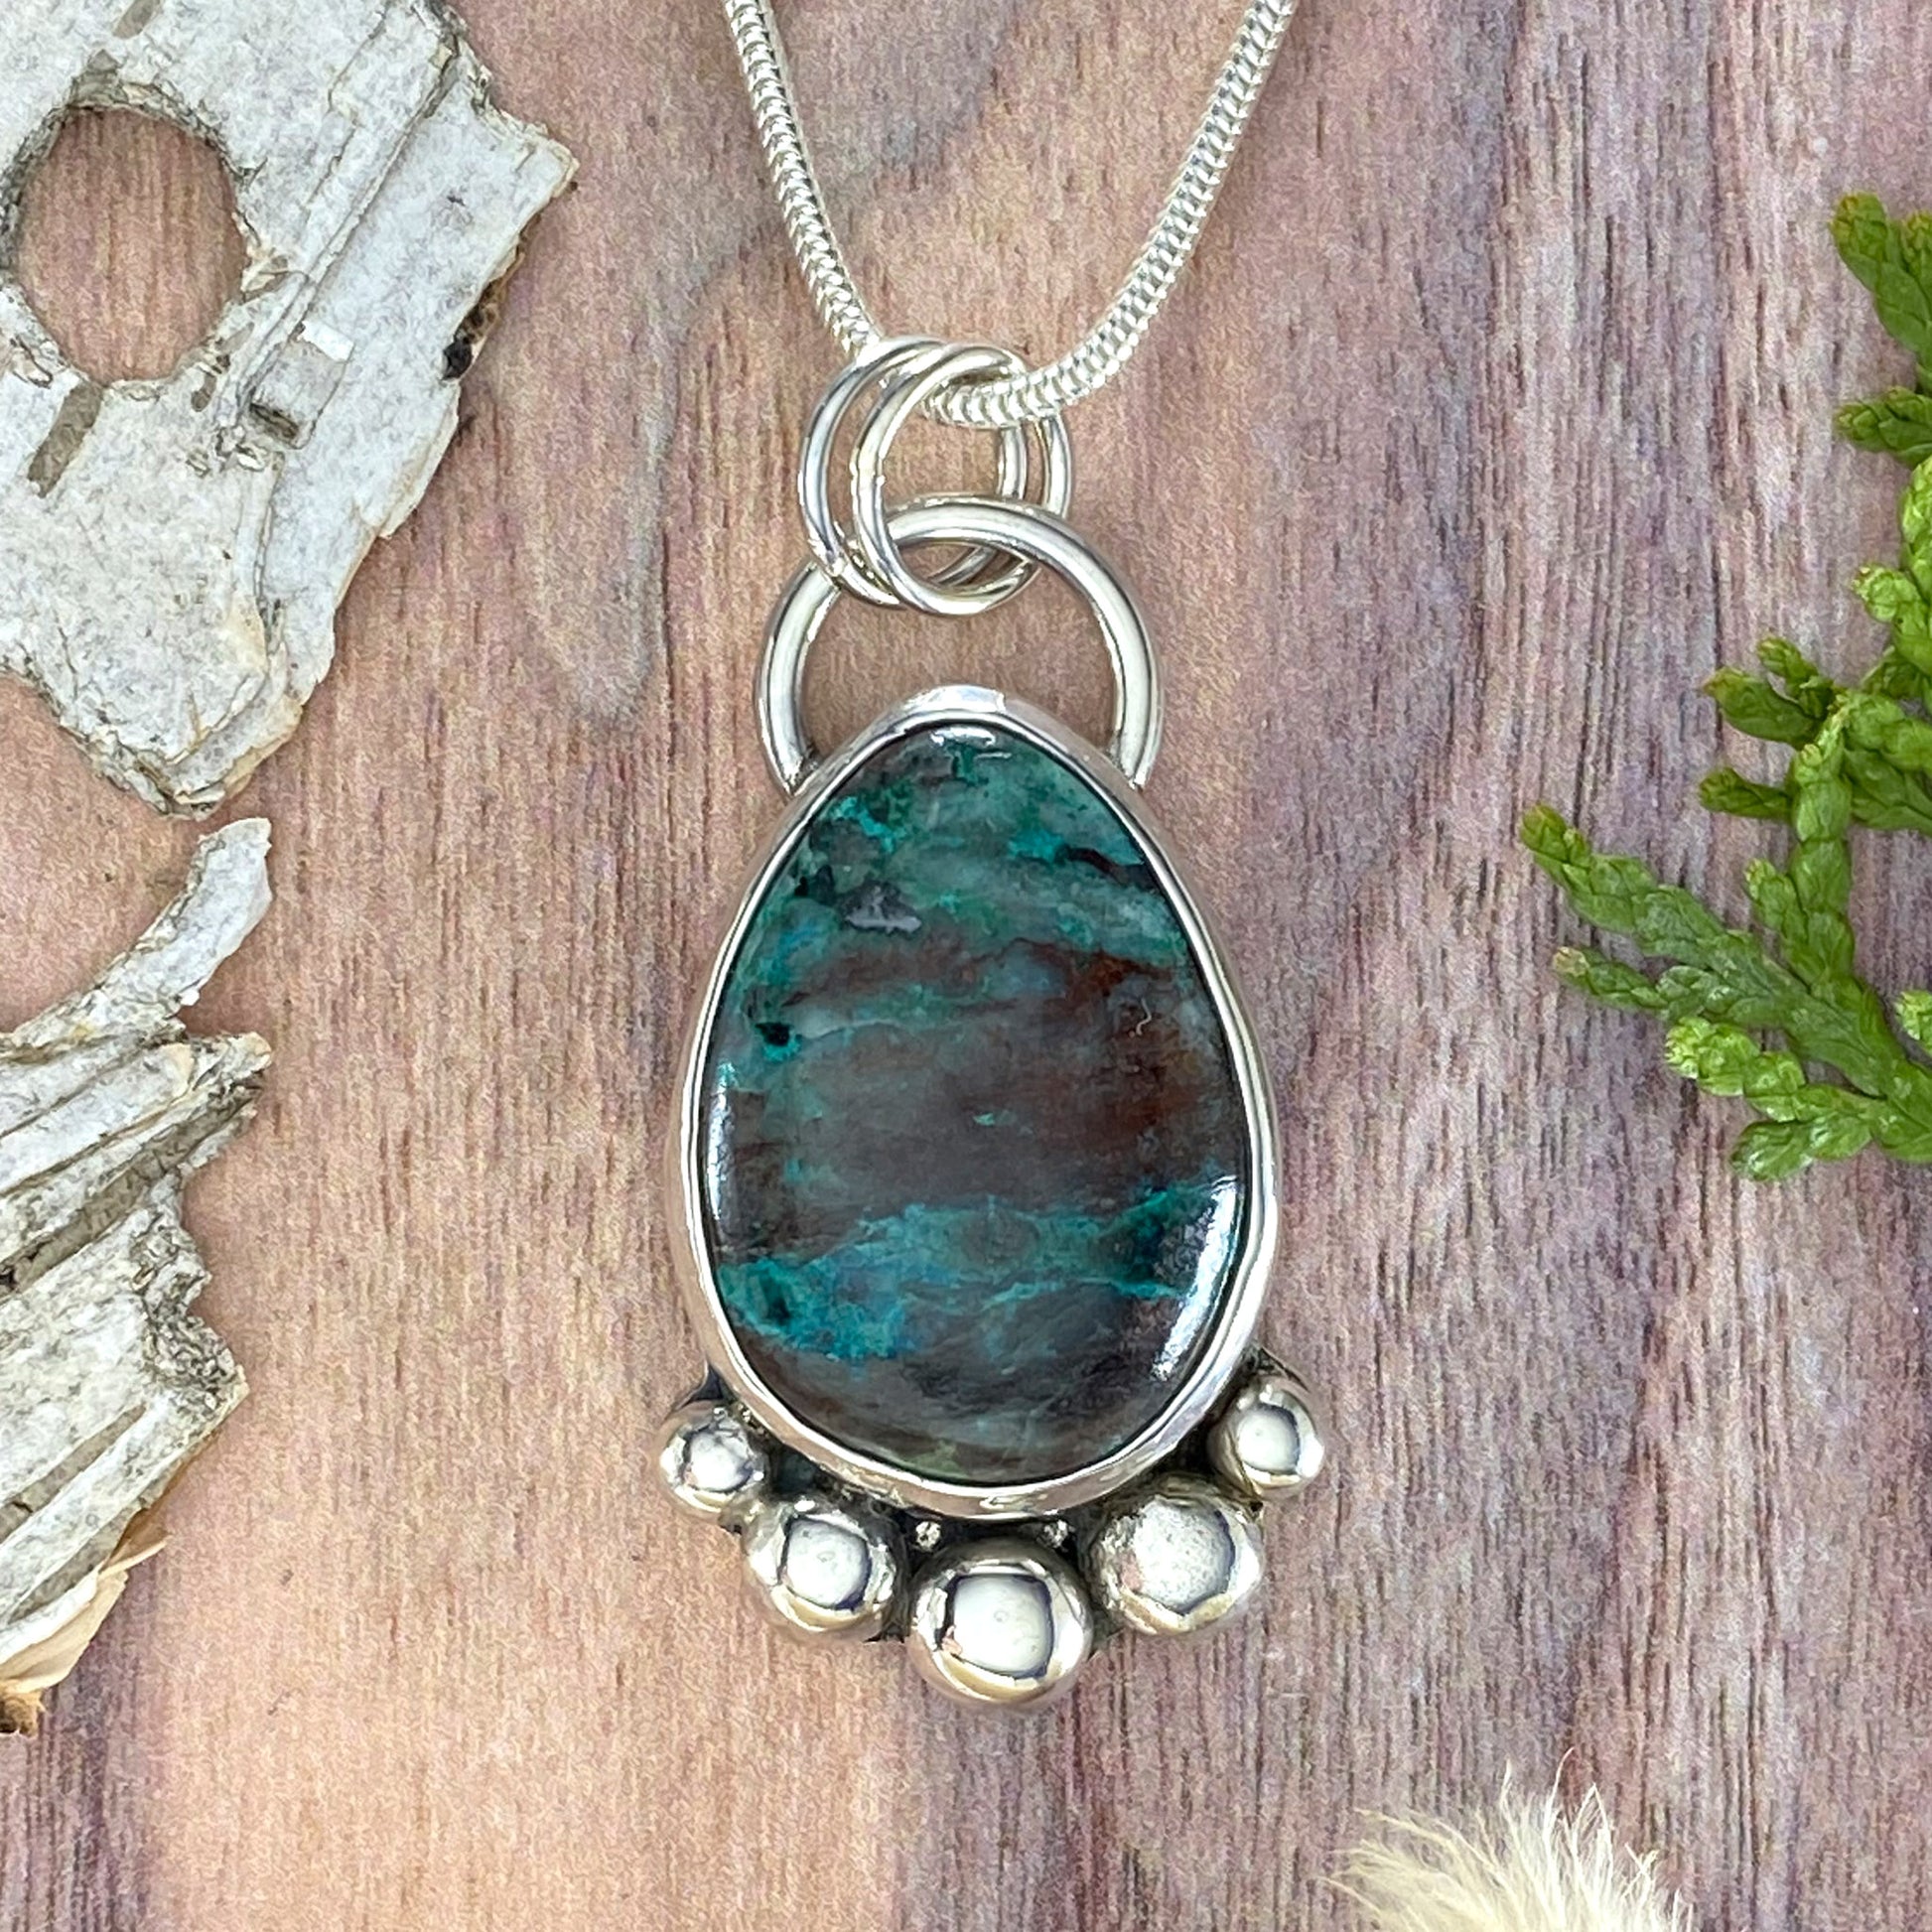 Chrysocolla Pendant Front View with chain - Stone Treasures by the Lake